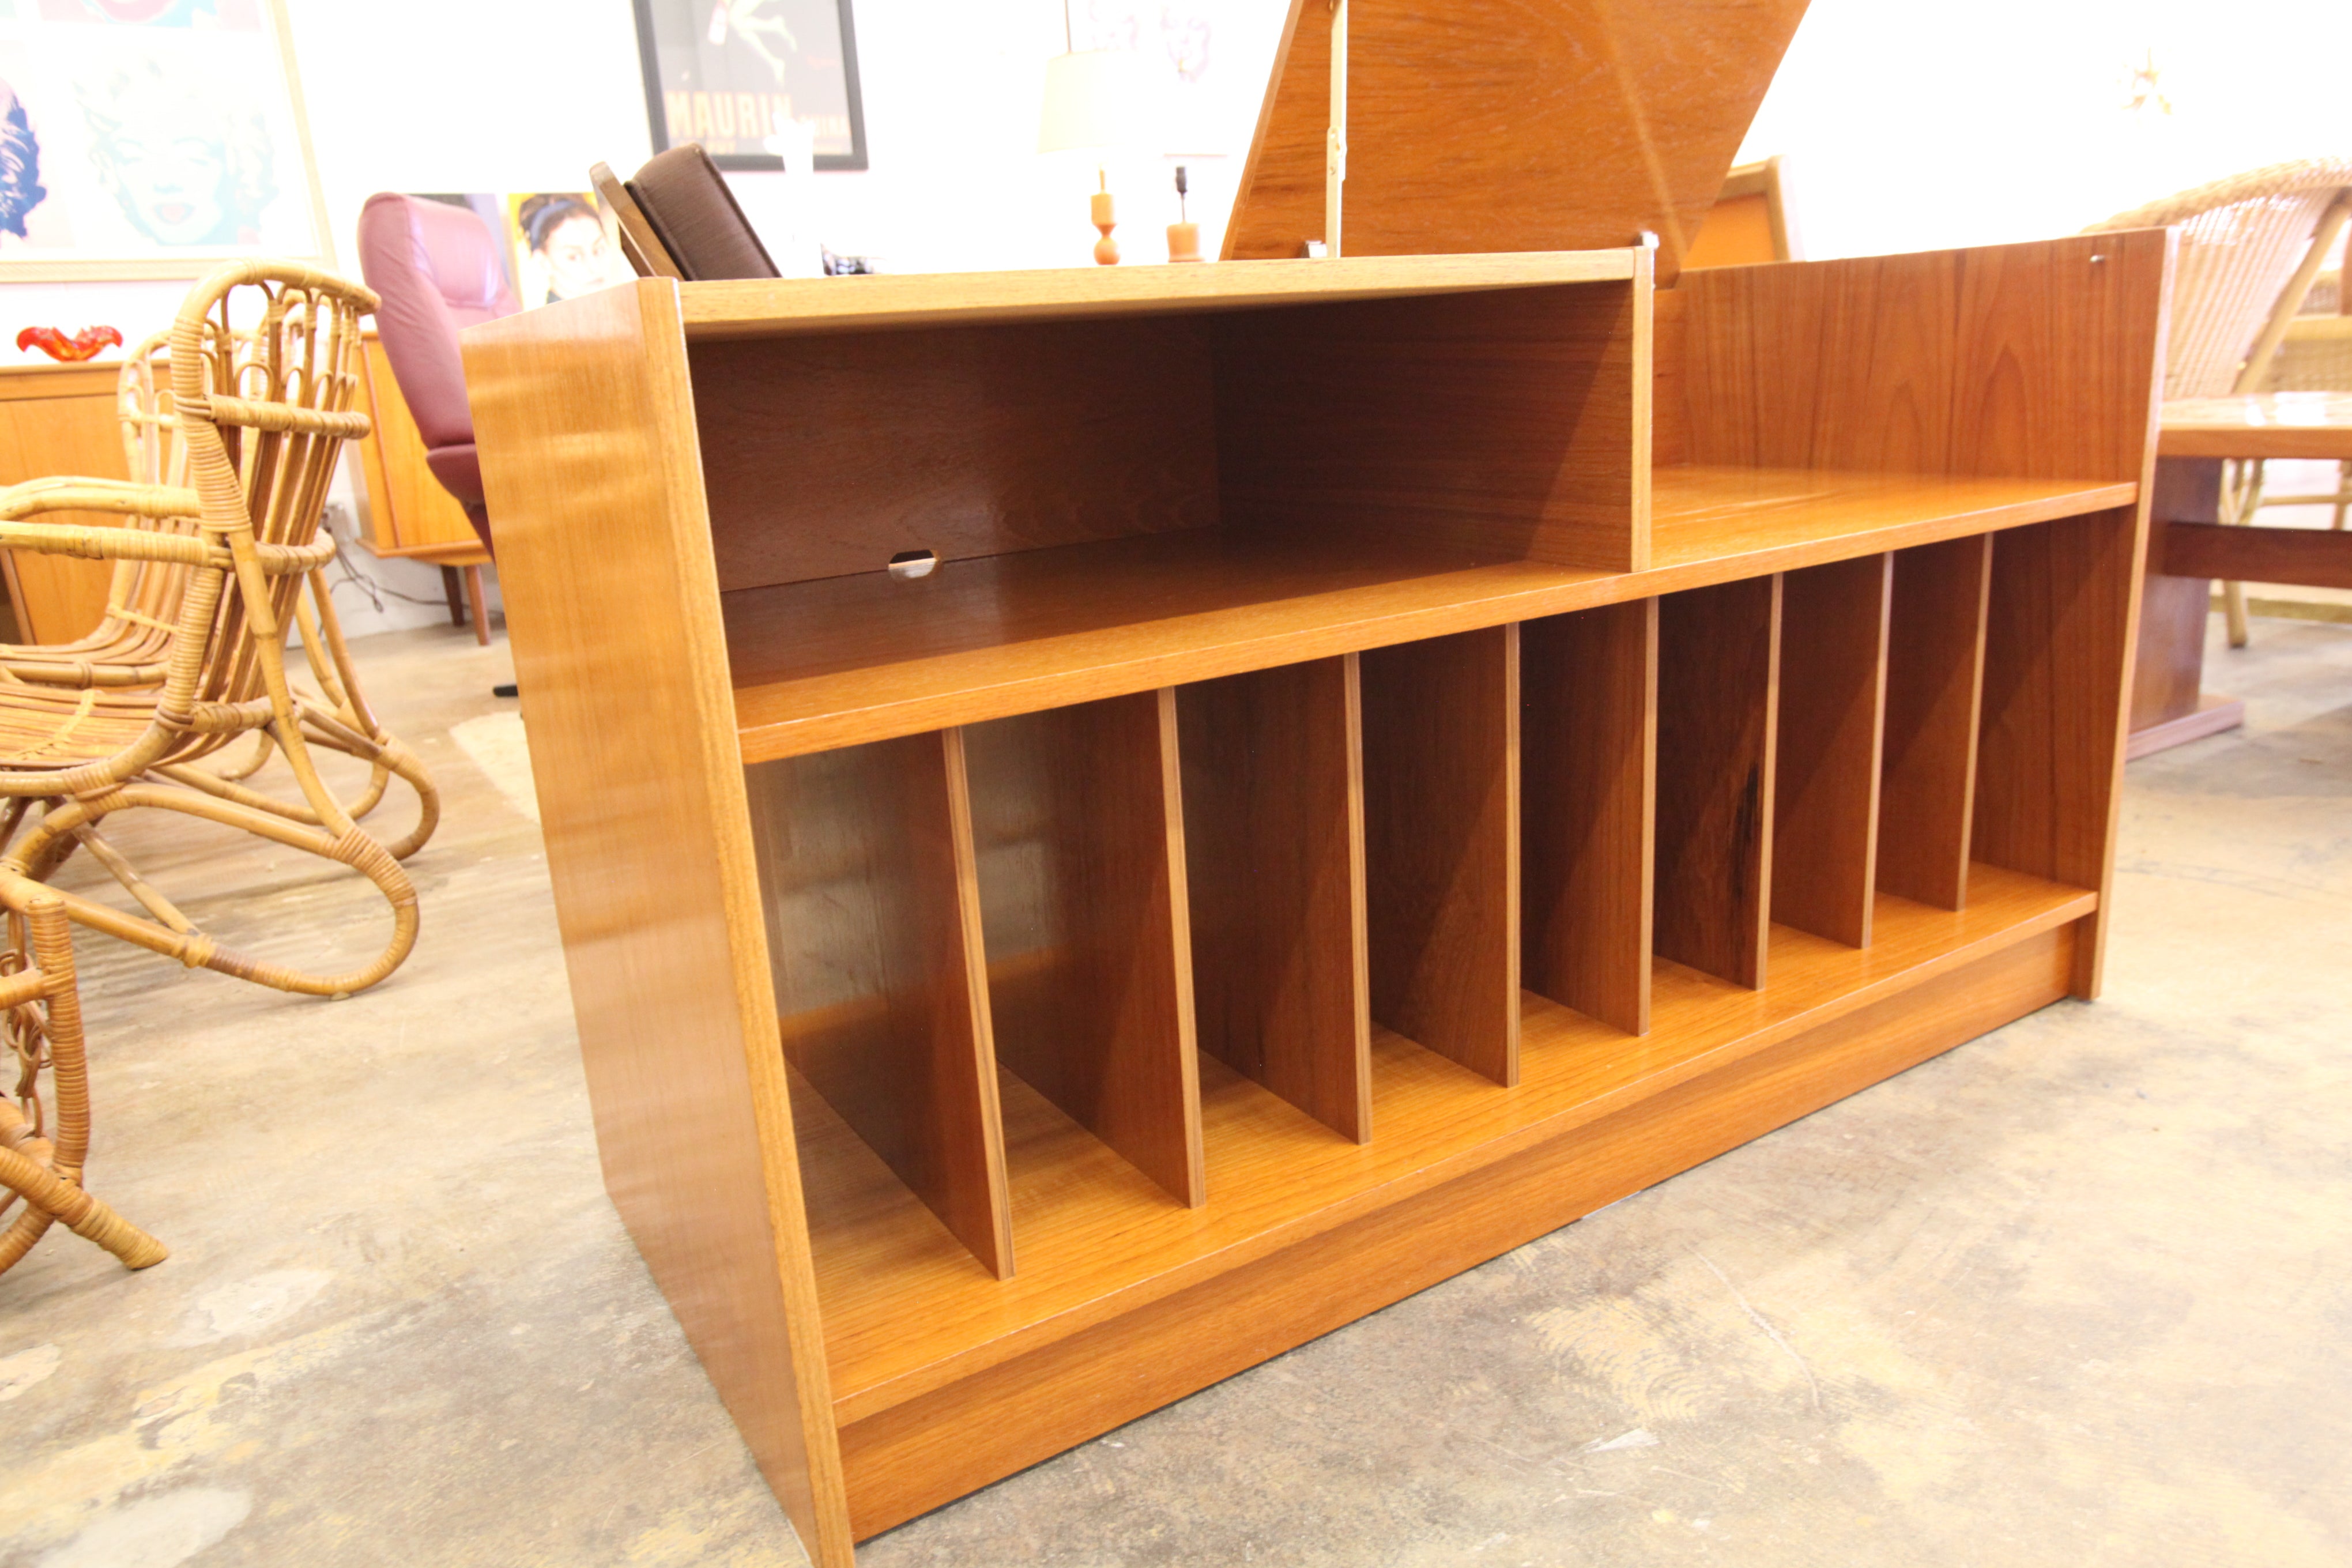 Vintage Teak Stereo Cabinet / Stand (46.25"W x 19.5"D x 25.5"H)